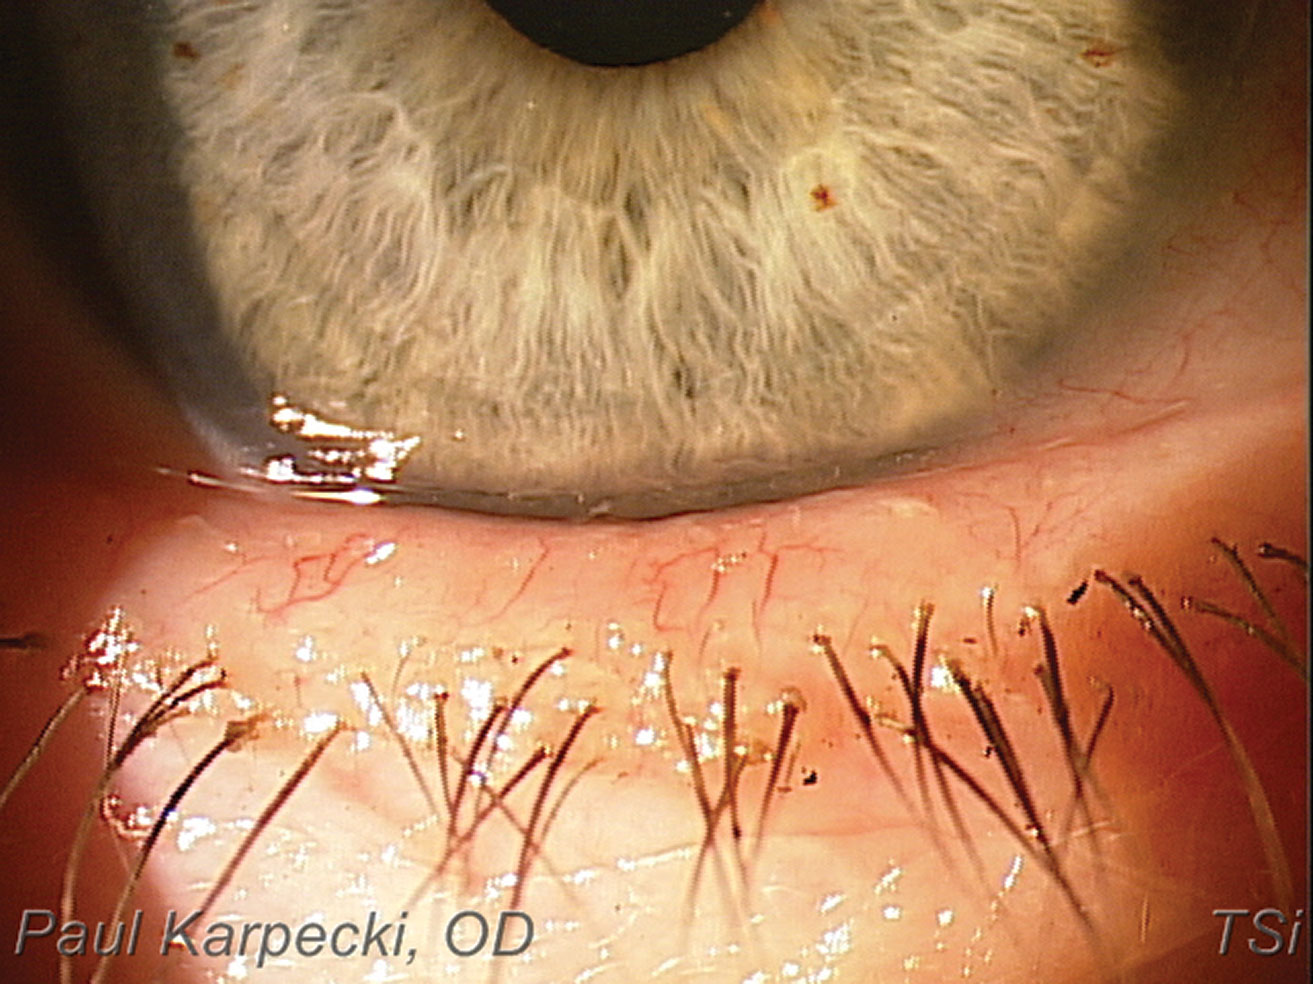 Telangiectasia and blepharitis in a patient with rosacea.